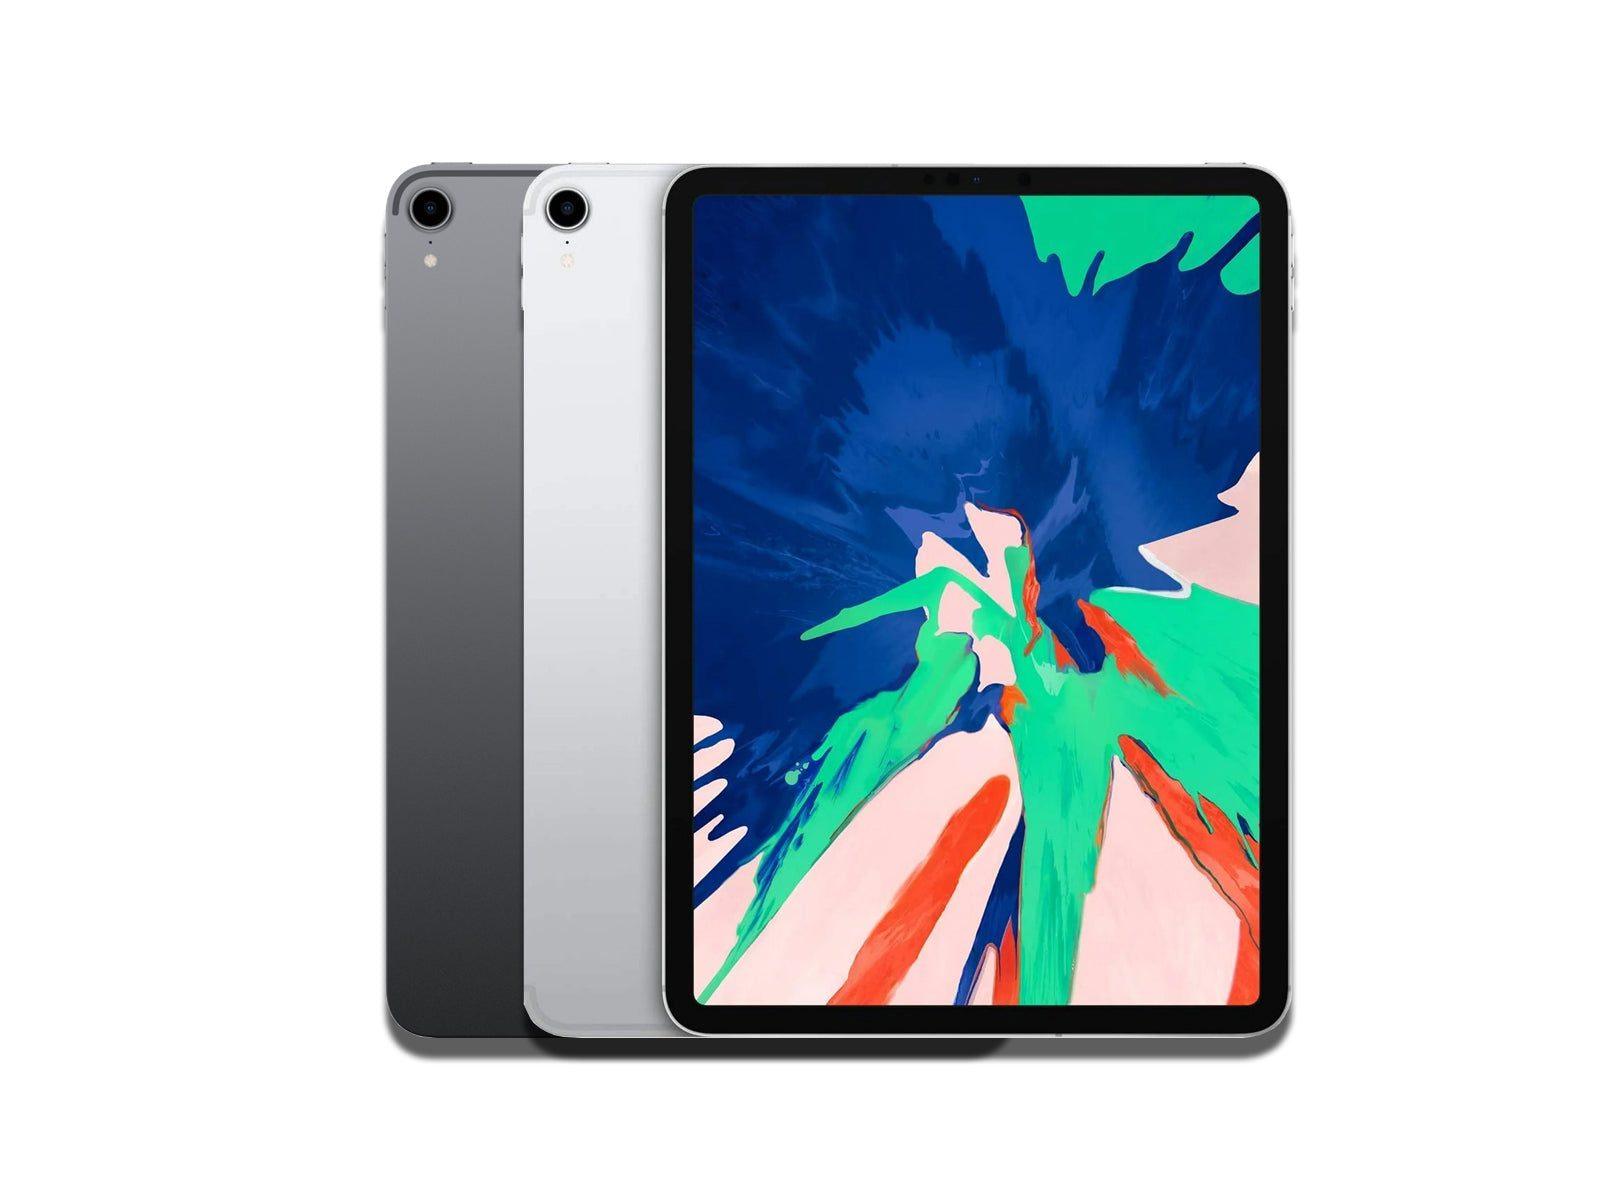 iPad Pro 11inch 1st Gen colour Variant on the white background